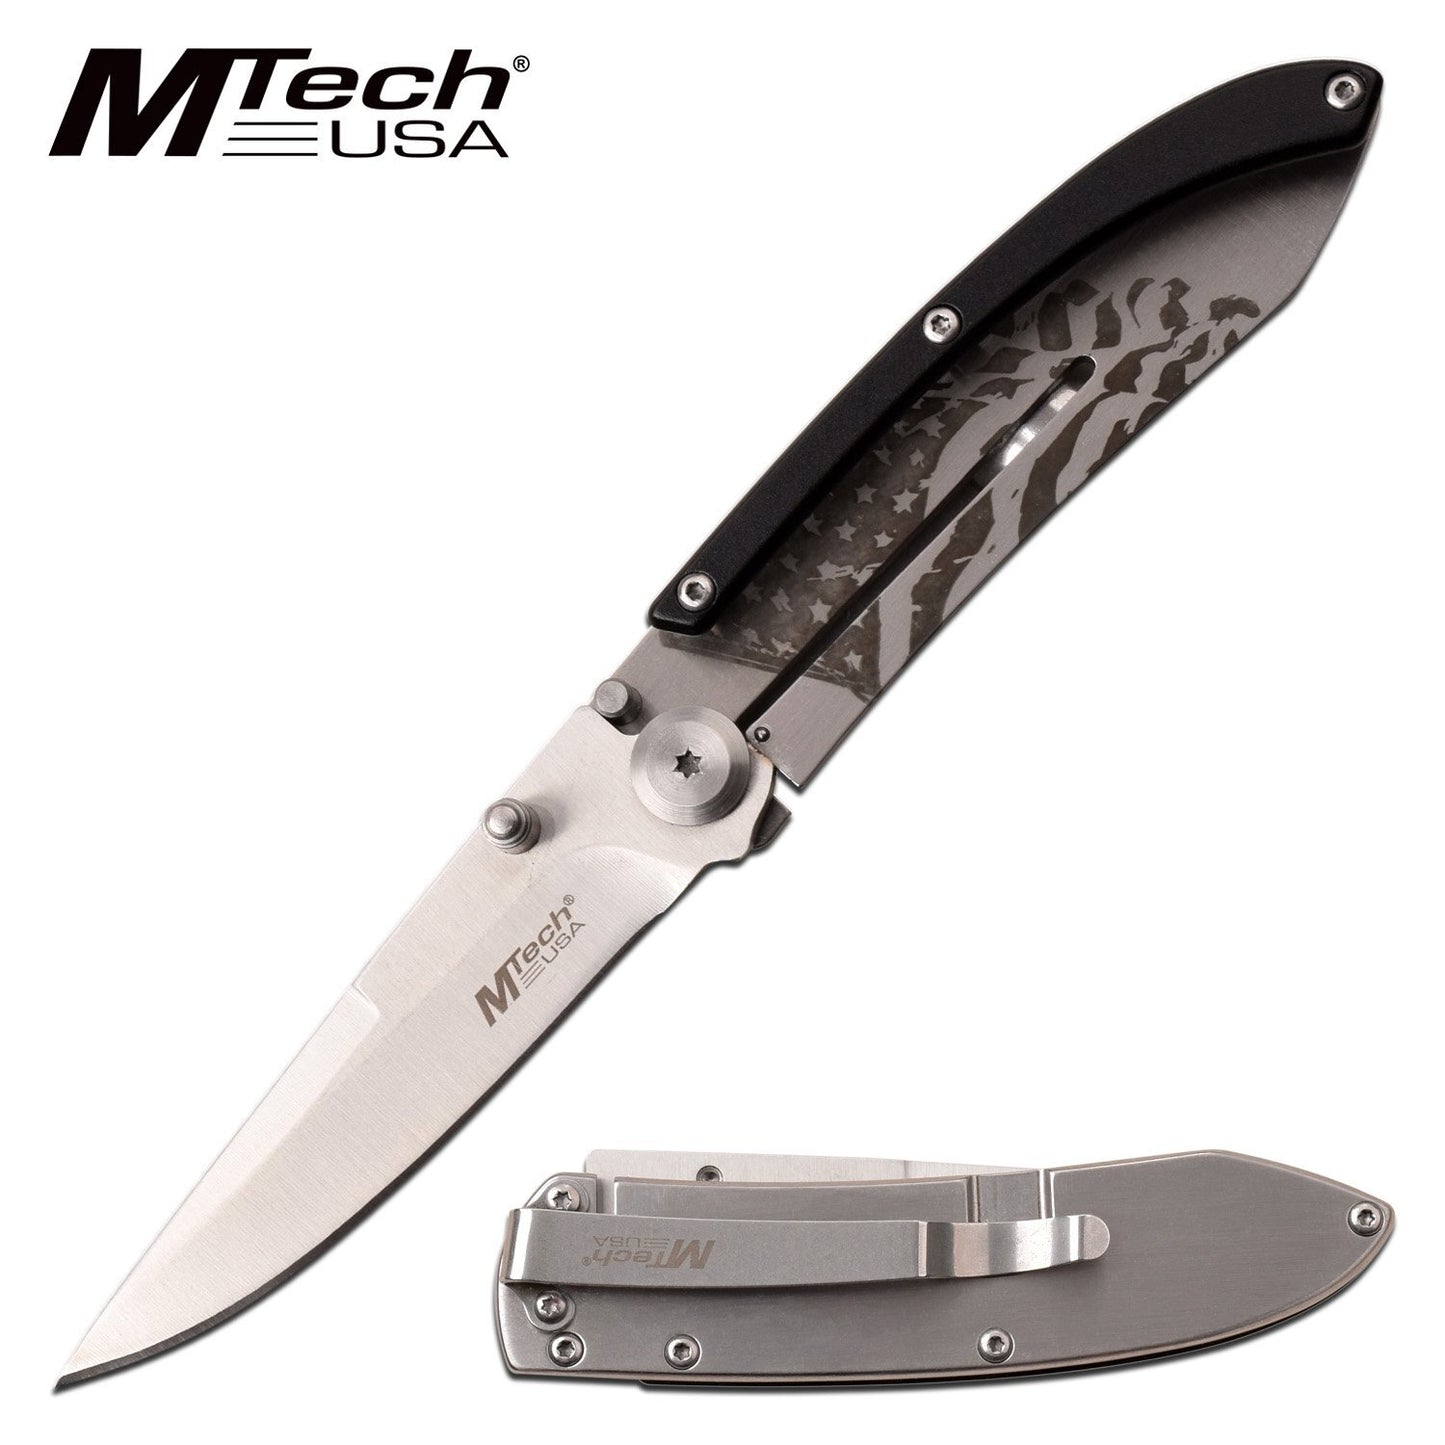 Mtech Mtech Tactical Drop Point Folding Knife - Us Flag 7.25 Inches Overall #mt-1151Af Antique White